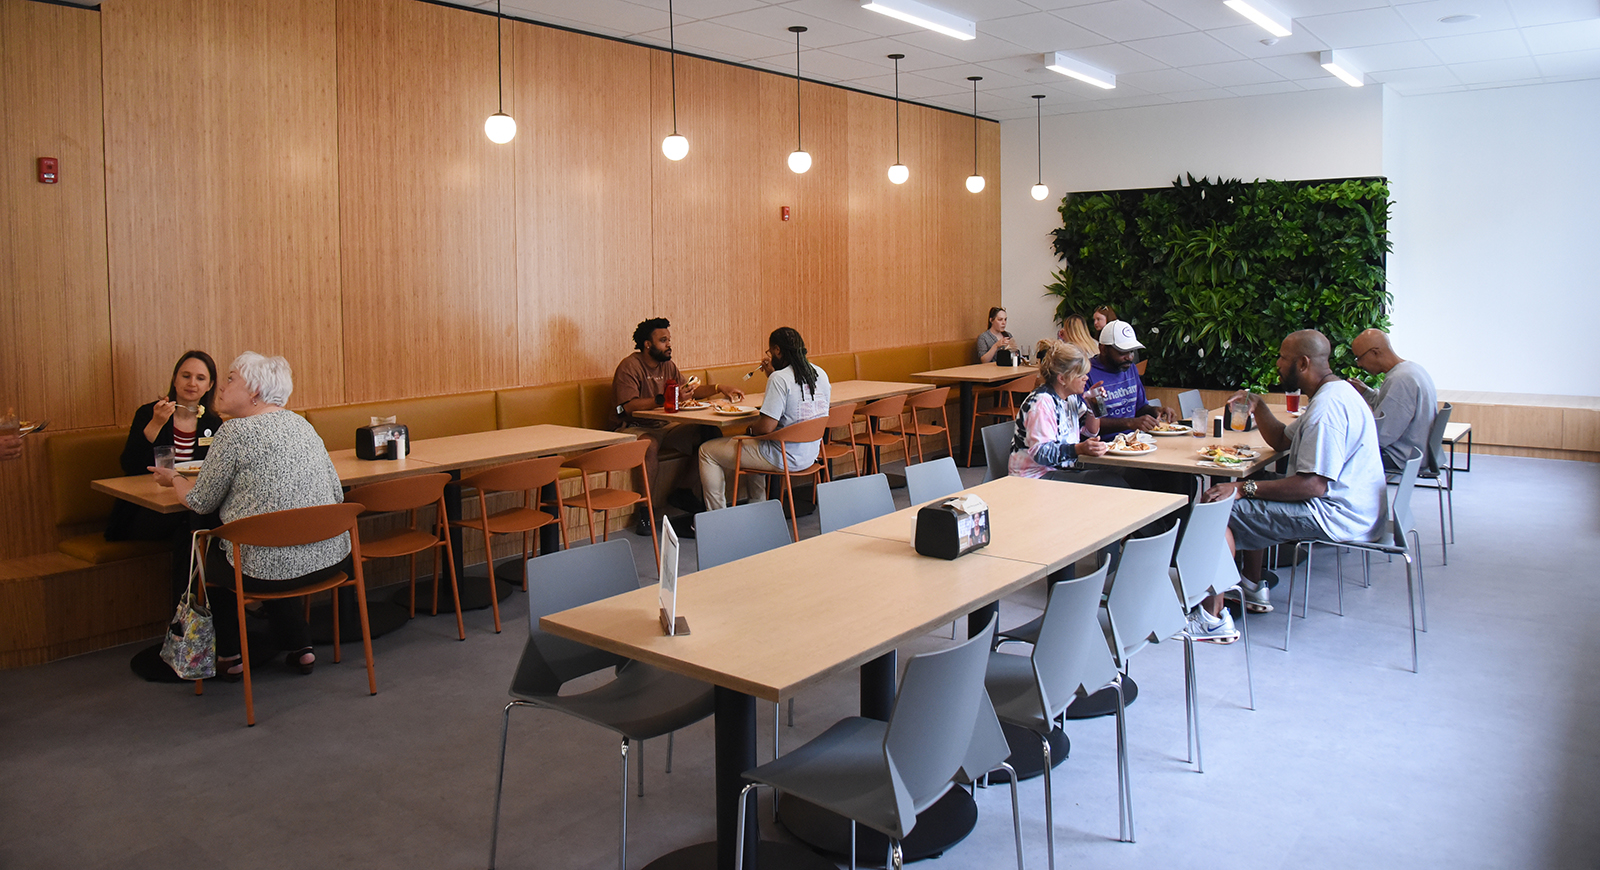 Photo of people eating in Anderson Dining Hall, near a plant wall